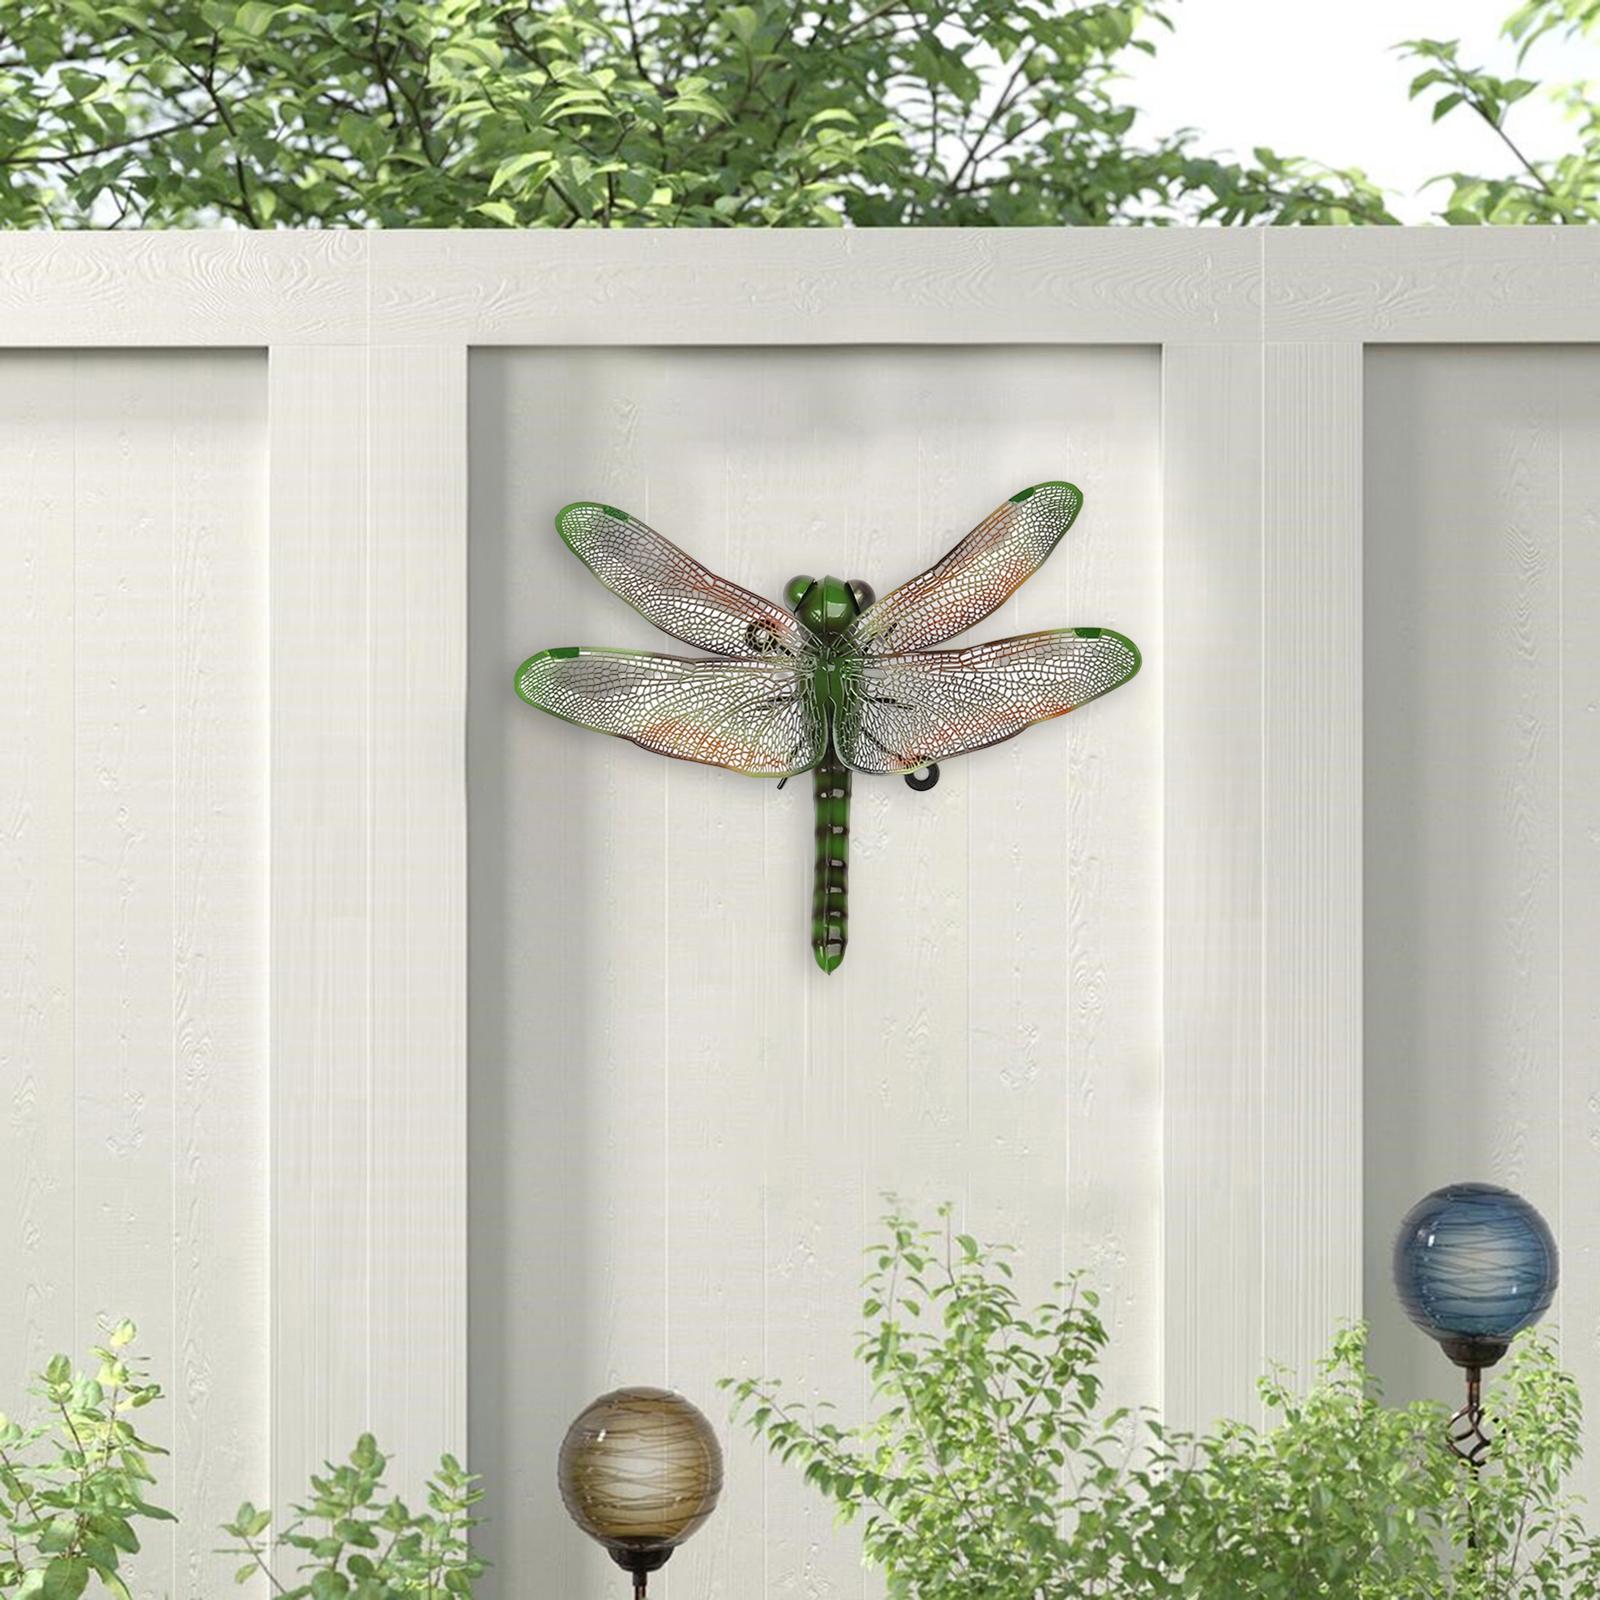 Metal Wall Dragonfly Decorations Art Crafts Decoration for Farmhouse Garden green